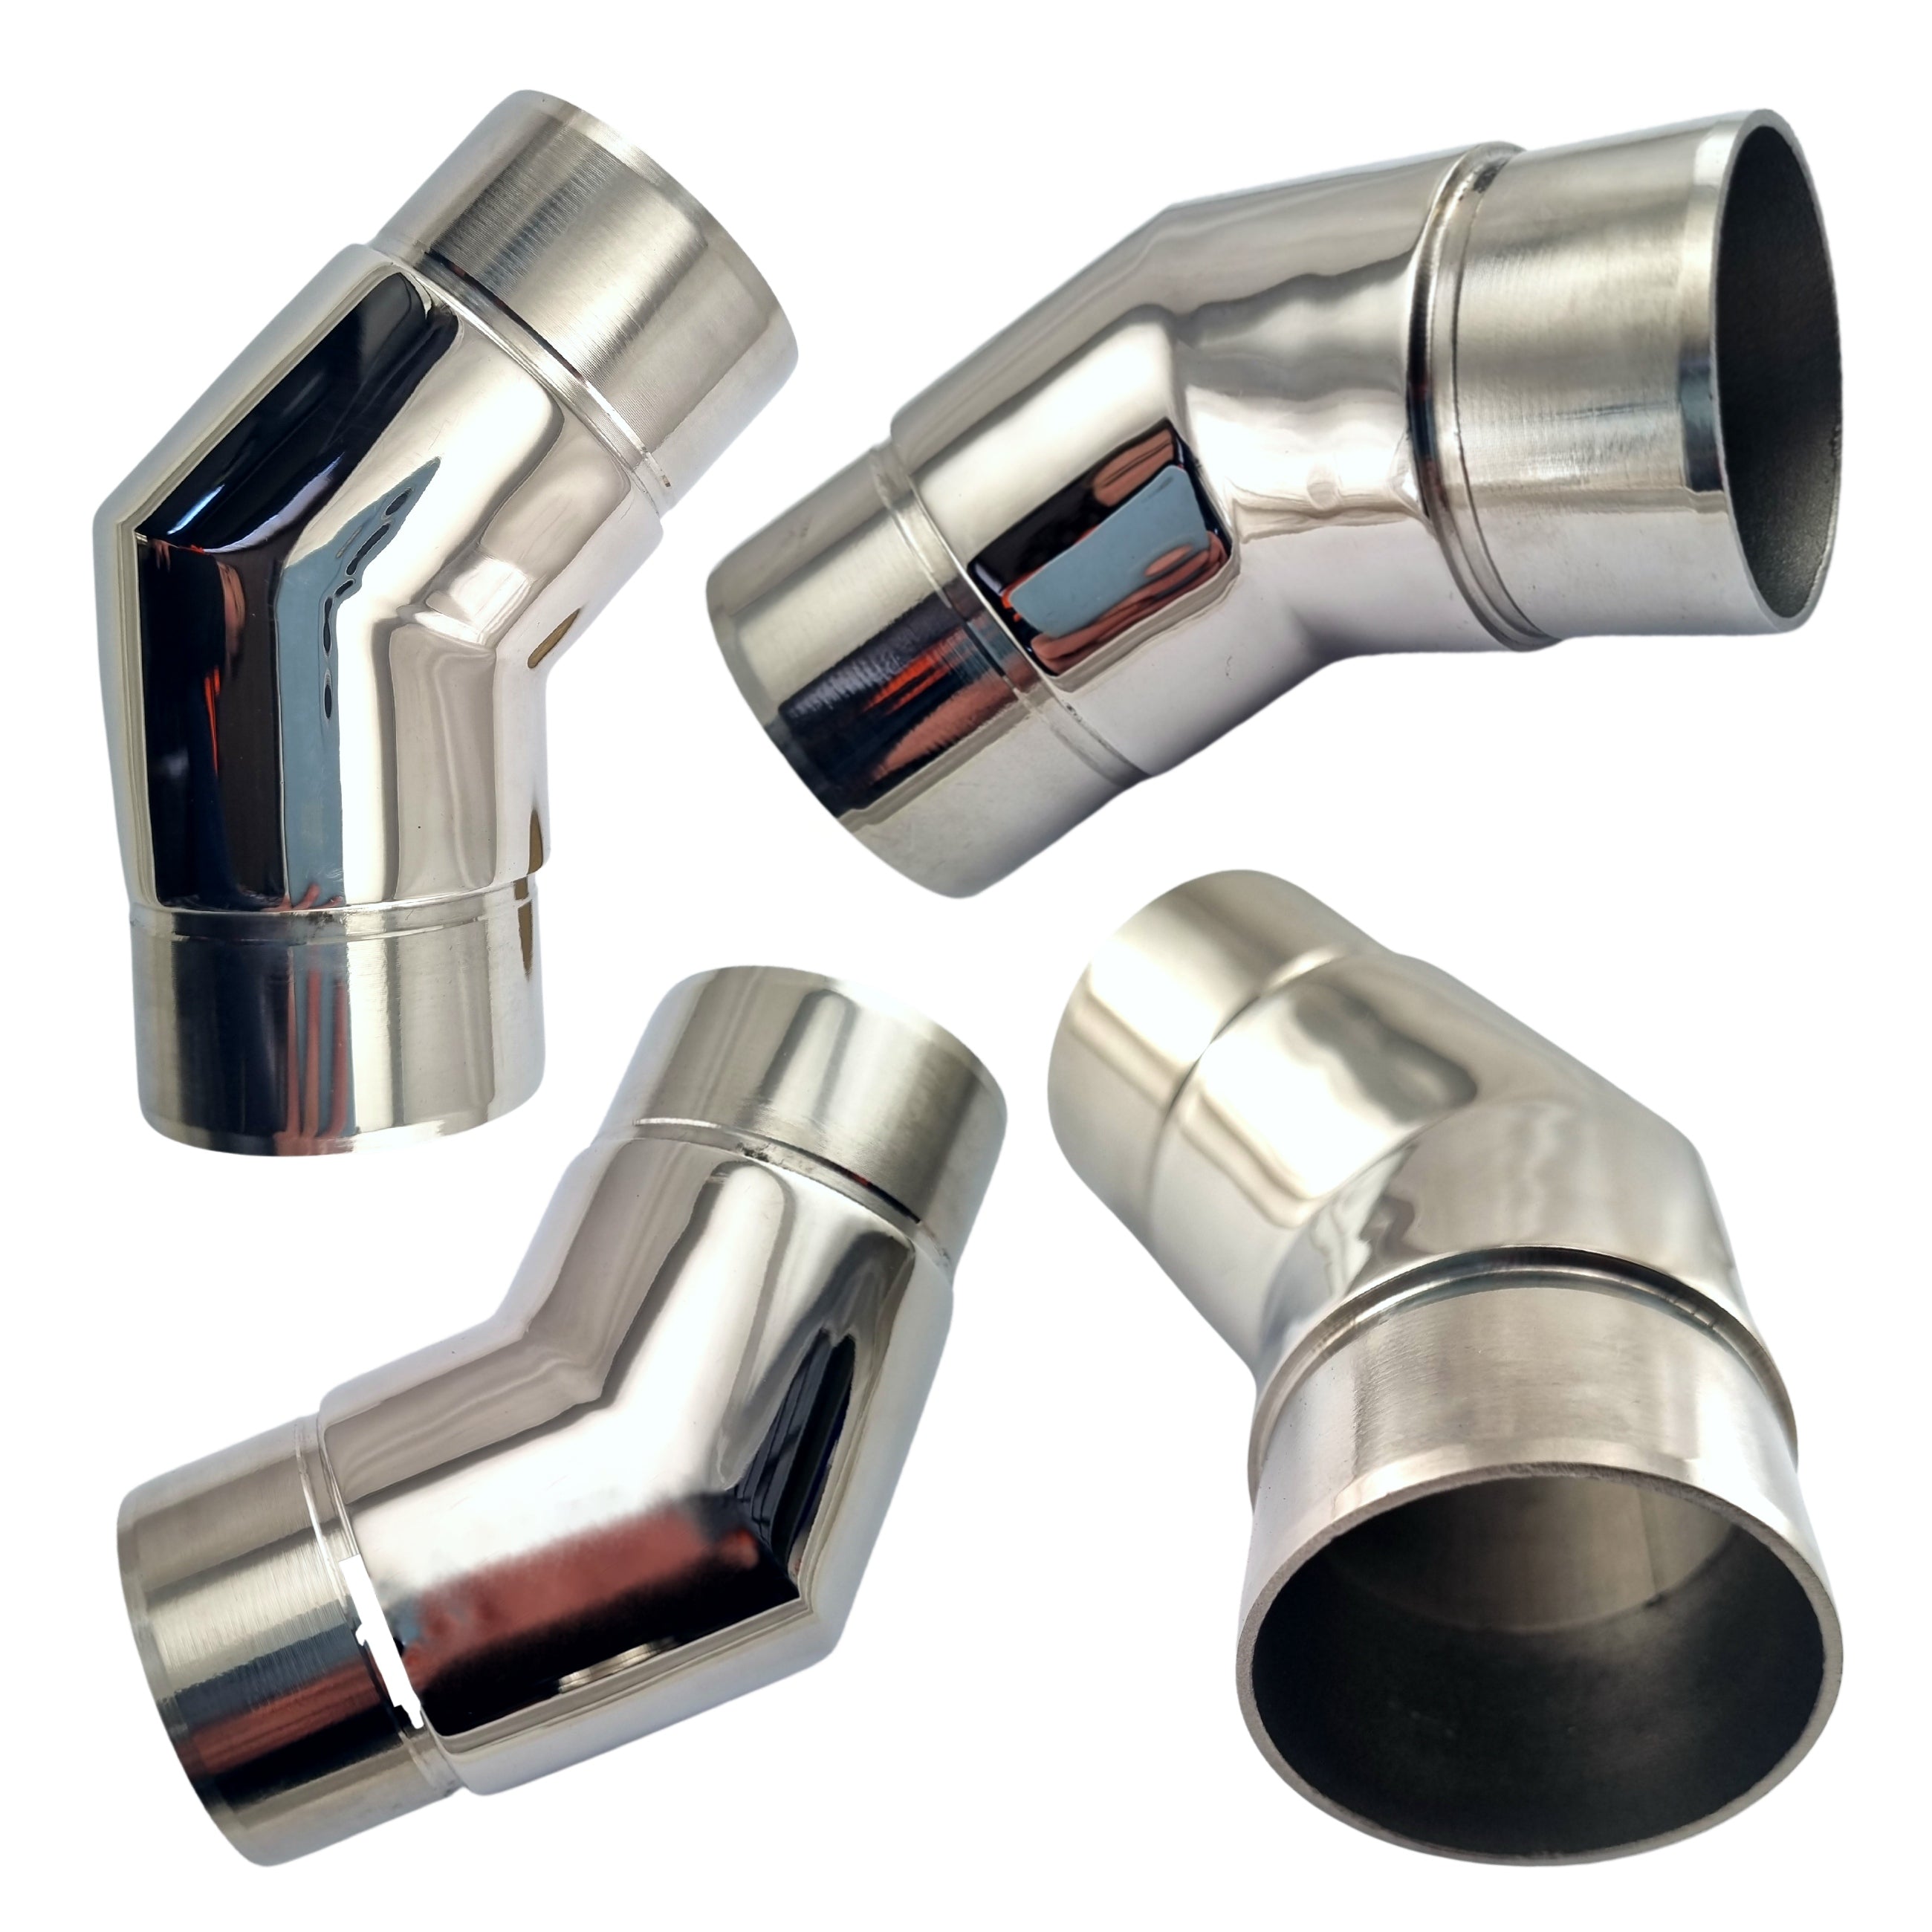 Stainless Steel Bull Nose End - 50.8mm Rail Fitting. Australia wide shipping. Shop: chain.com.au